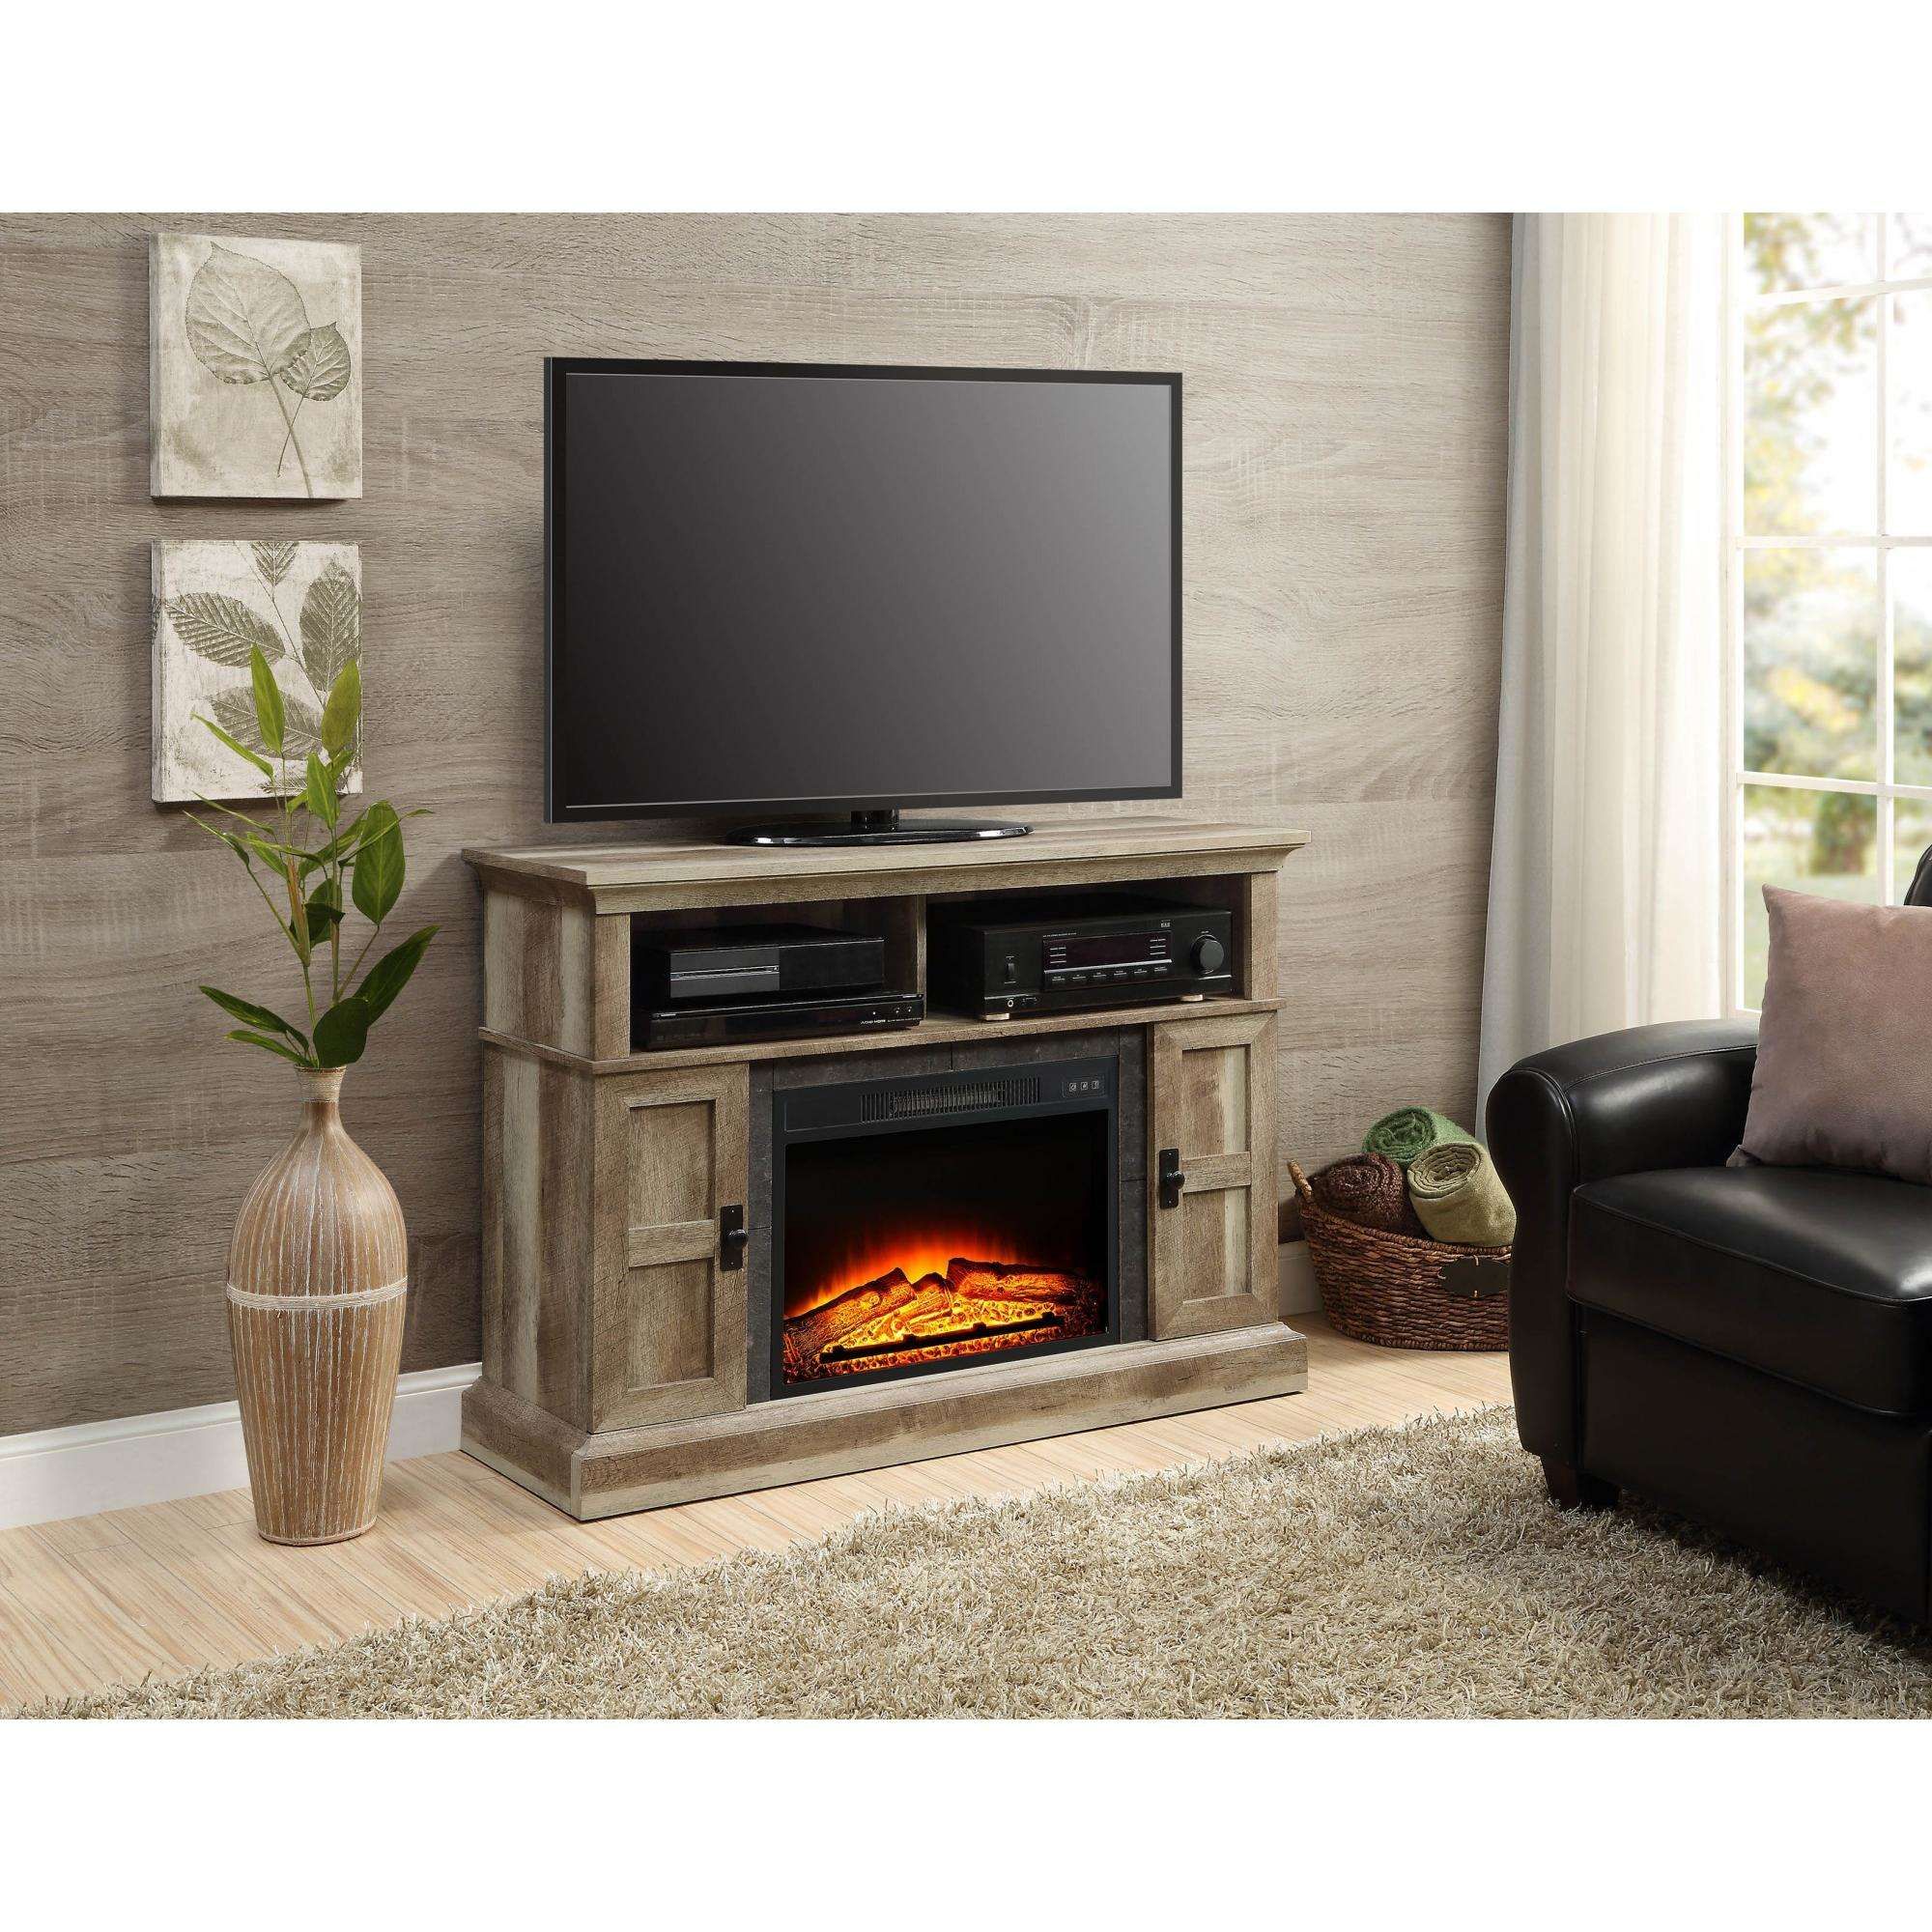 Floating Fireplace Tv Stand Unique Whalen Media Fireplace for Your Home Television Stand Fits